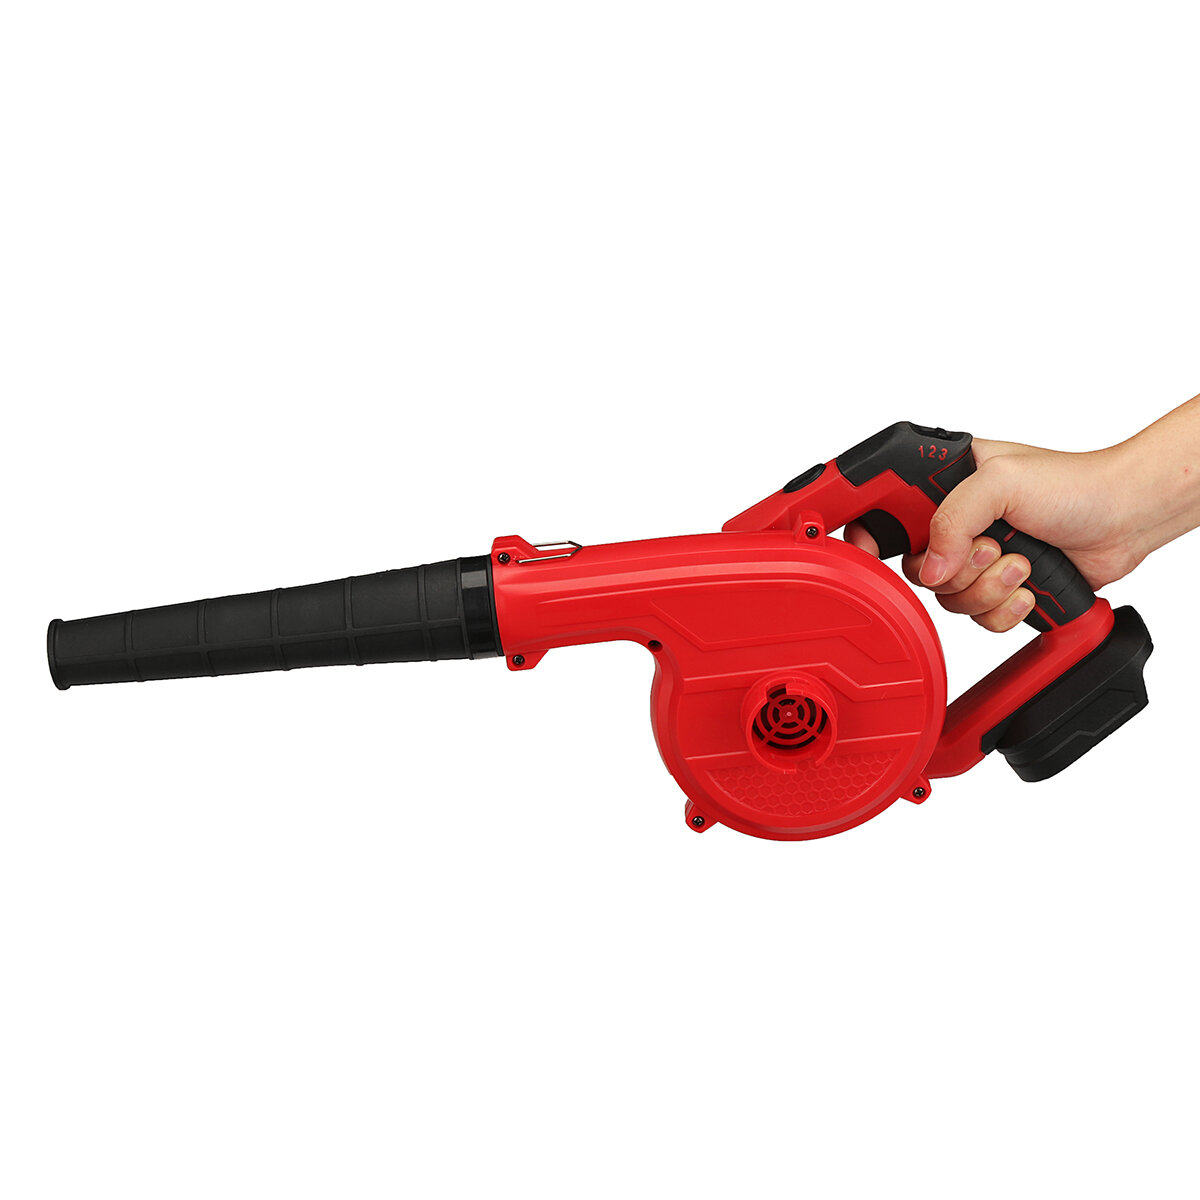 VIOLEWORKS 98VF 2 IN 1 Cordless 180? Rotation Electric Air Blower & Suction Handheld Leaf Computer D